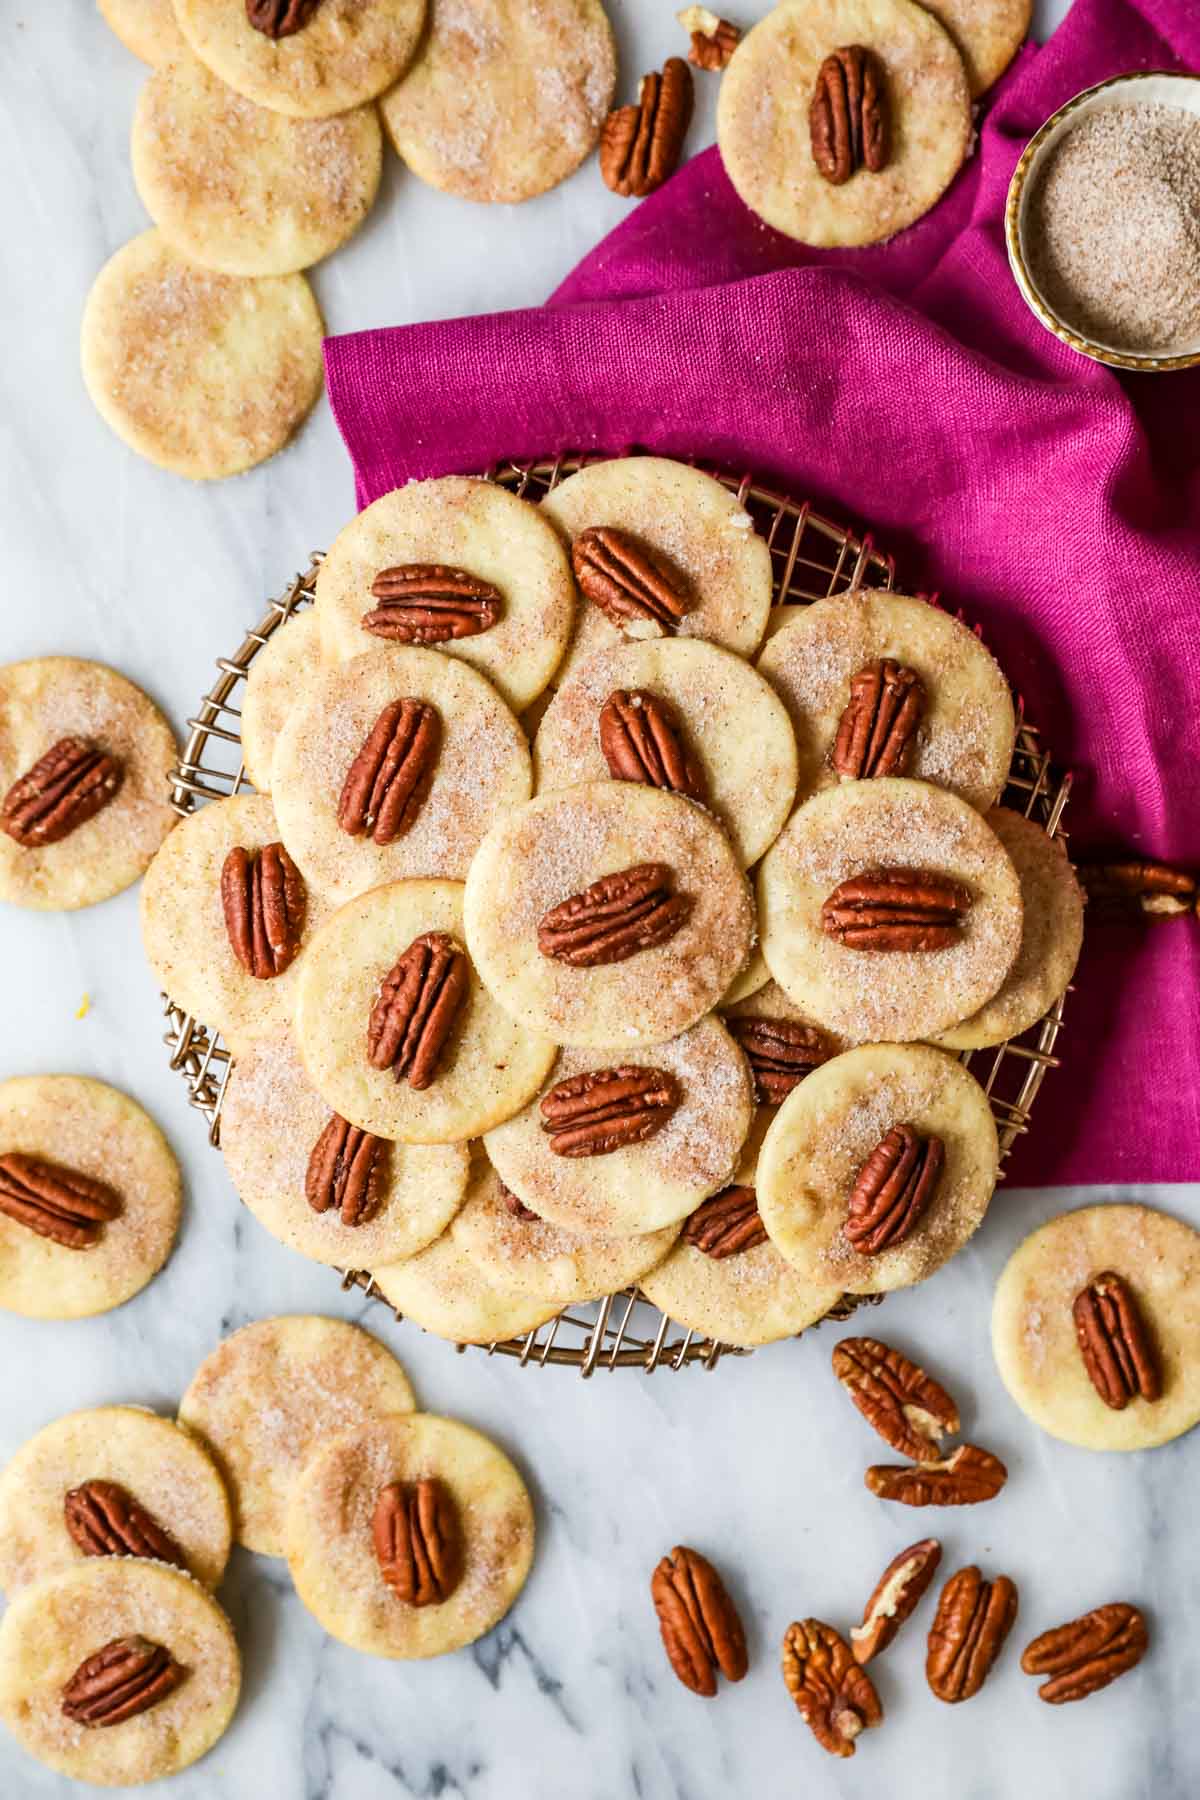 Overhead view of sand tarts made with pecans arranged on a cooling rack.